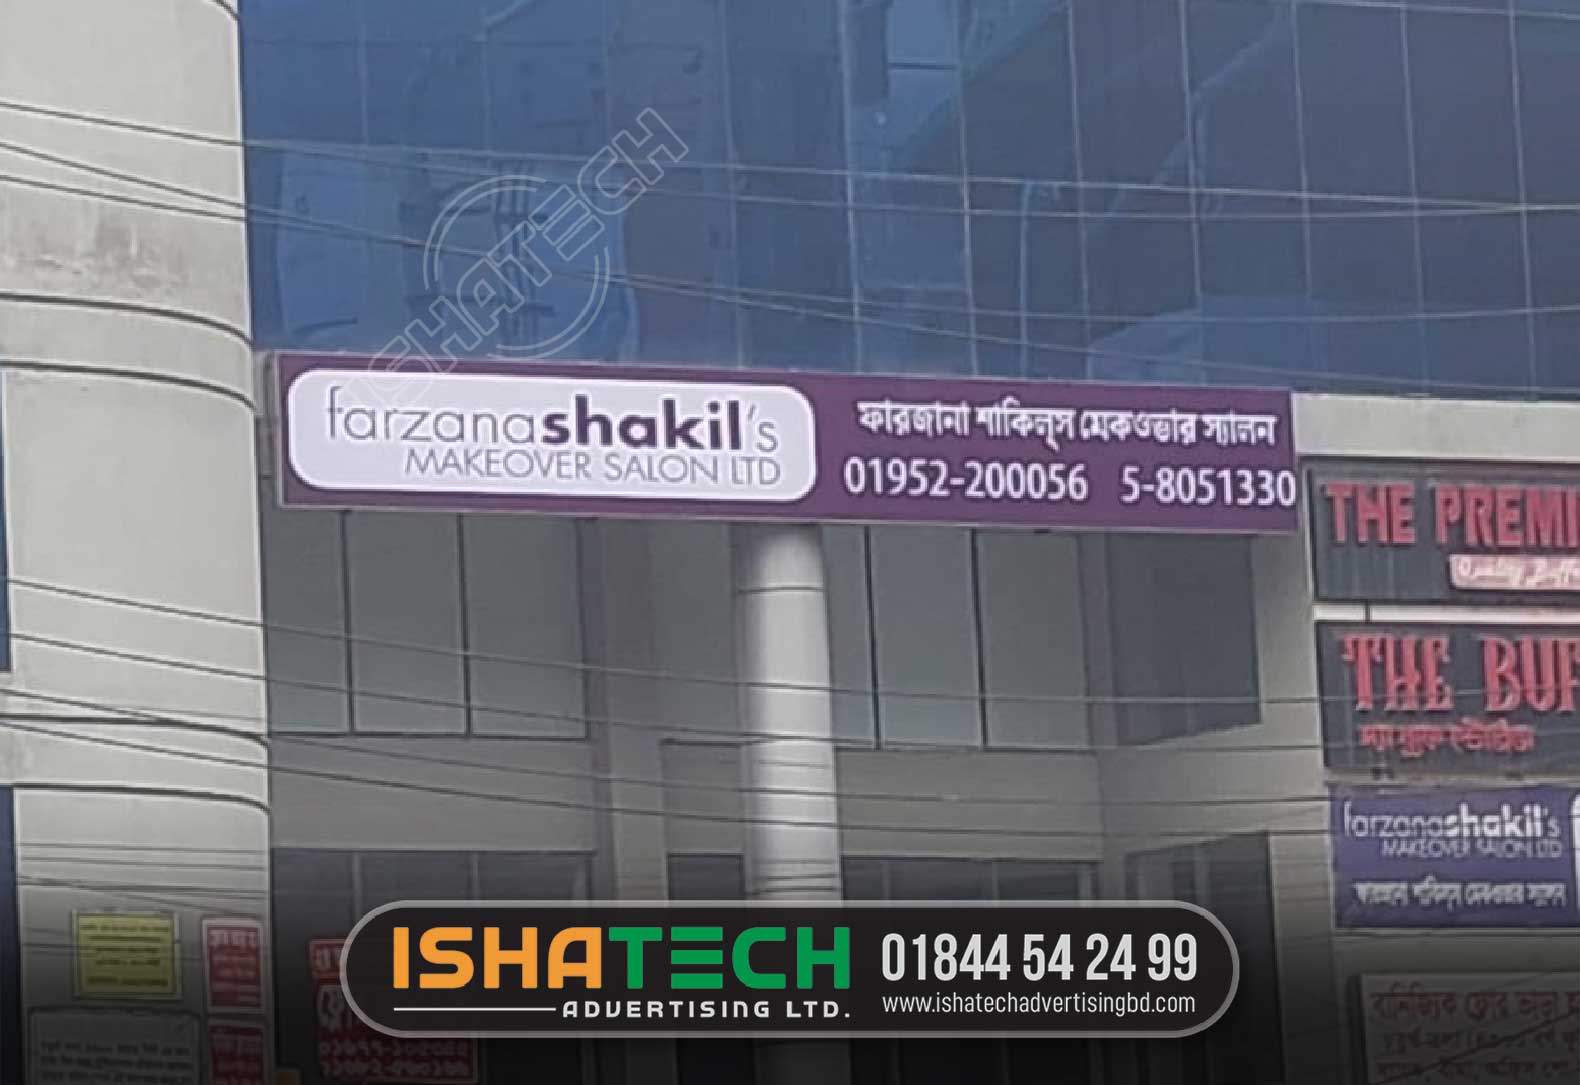 CORPORATE OFFICE OUTDOOR SIGNBOARD SIGNAGE MAKING BD BY IHATECH ADVERTISING LTD. SIGNAGE AGENCY BD, PANA SIGNS, PROFILE LIGHTING SIGNBOARD BD,